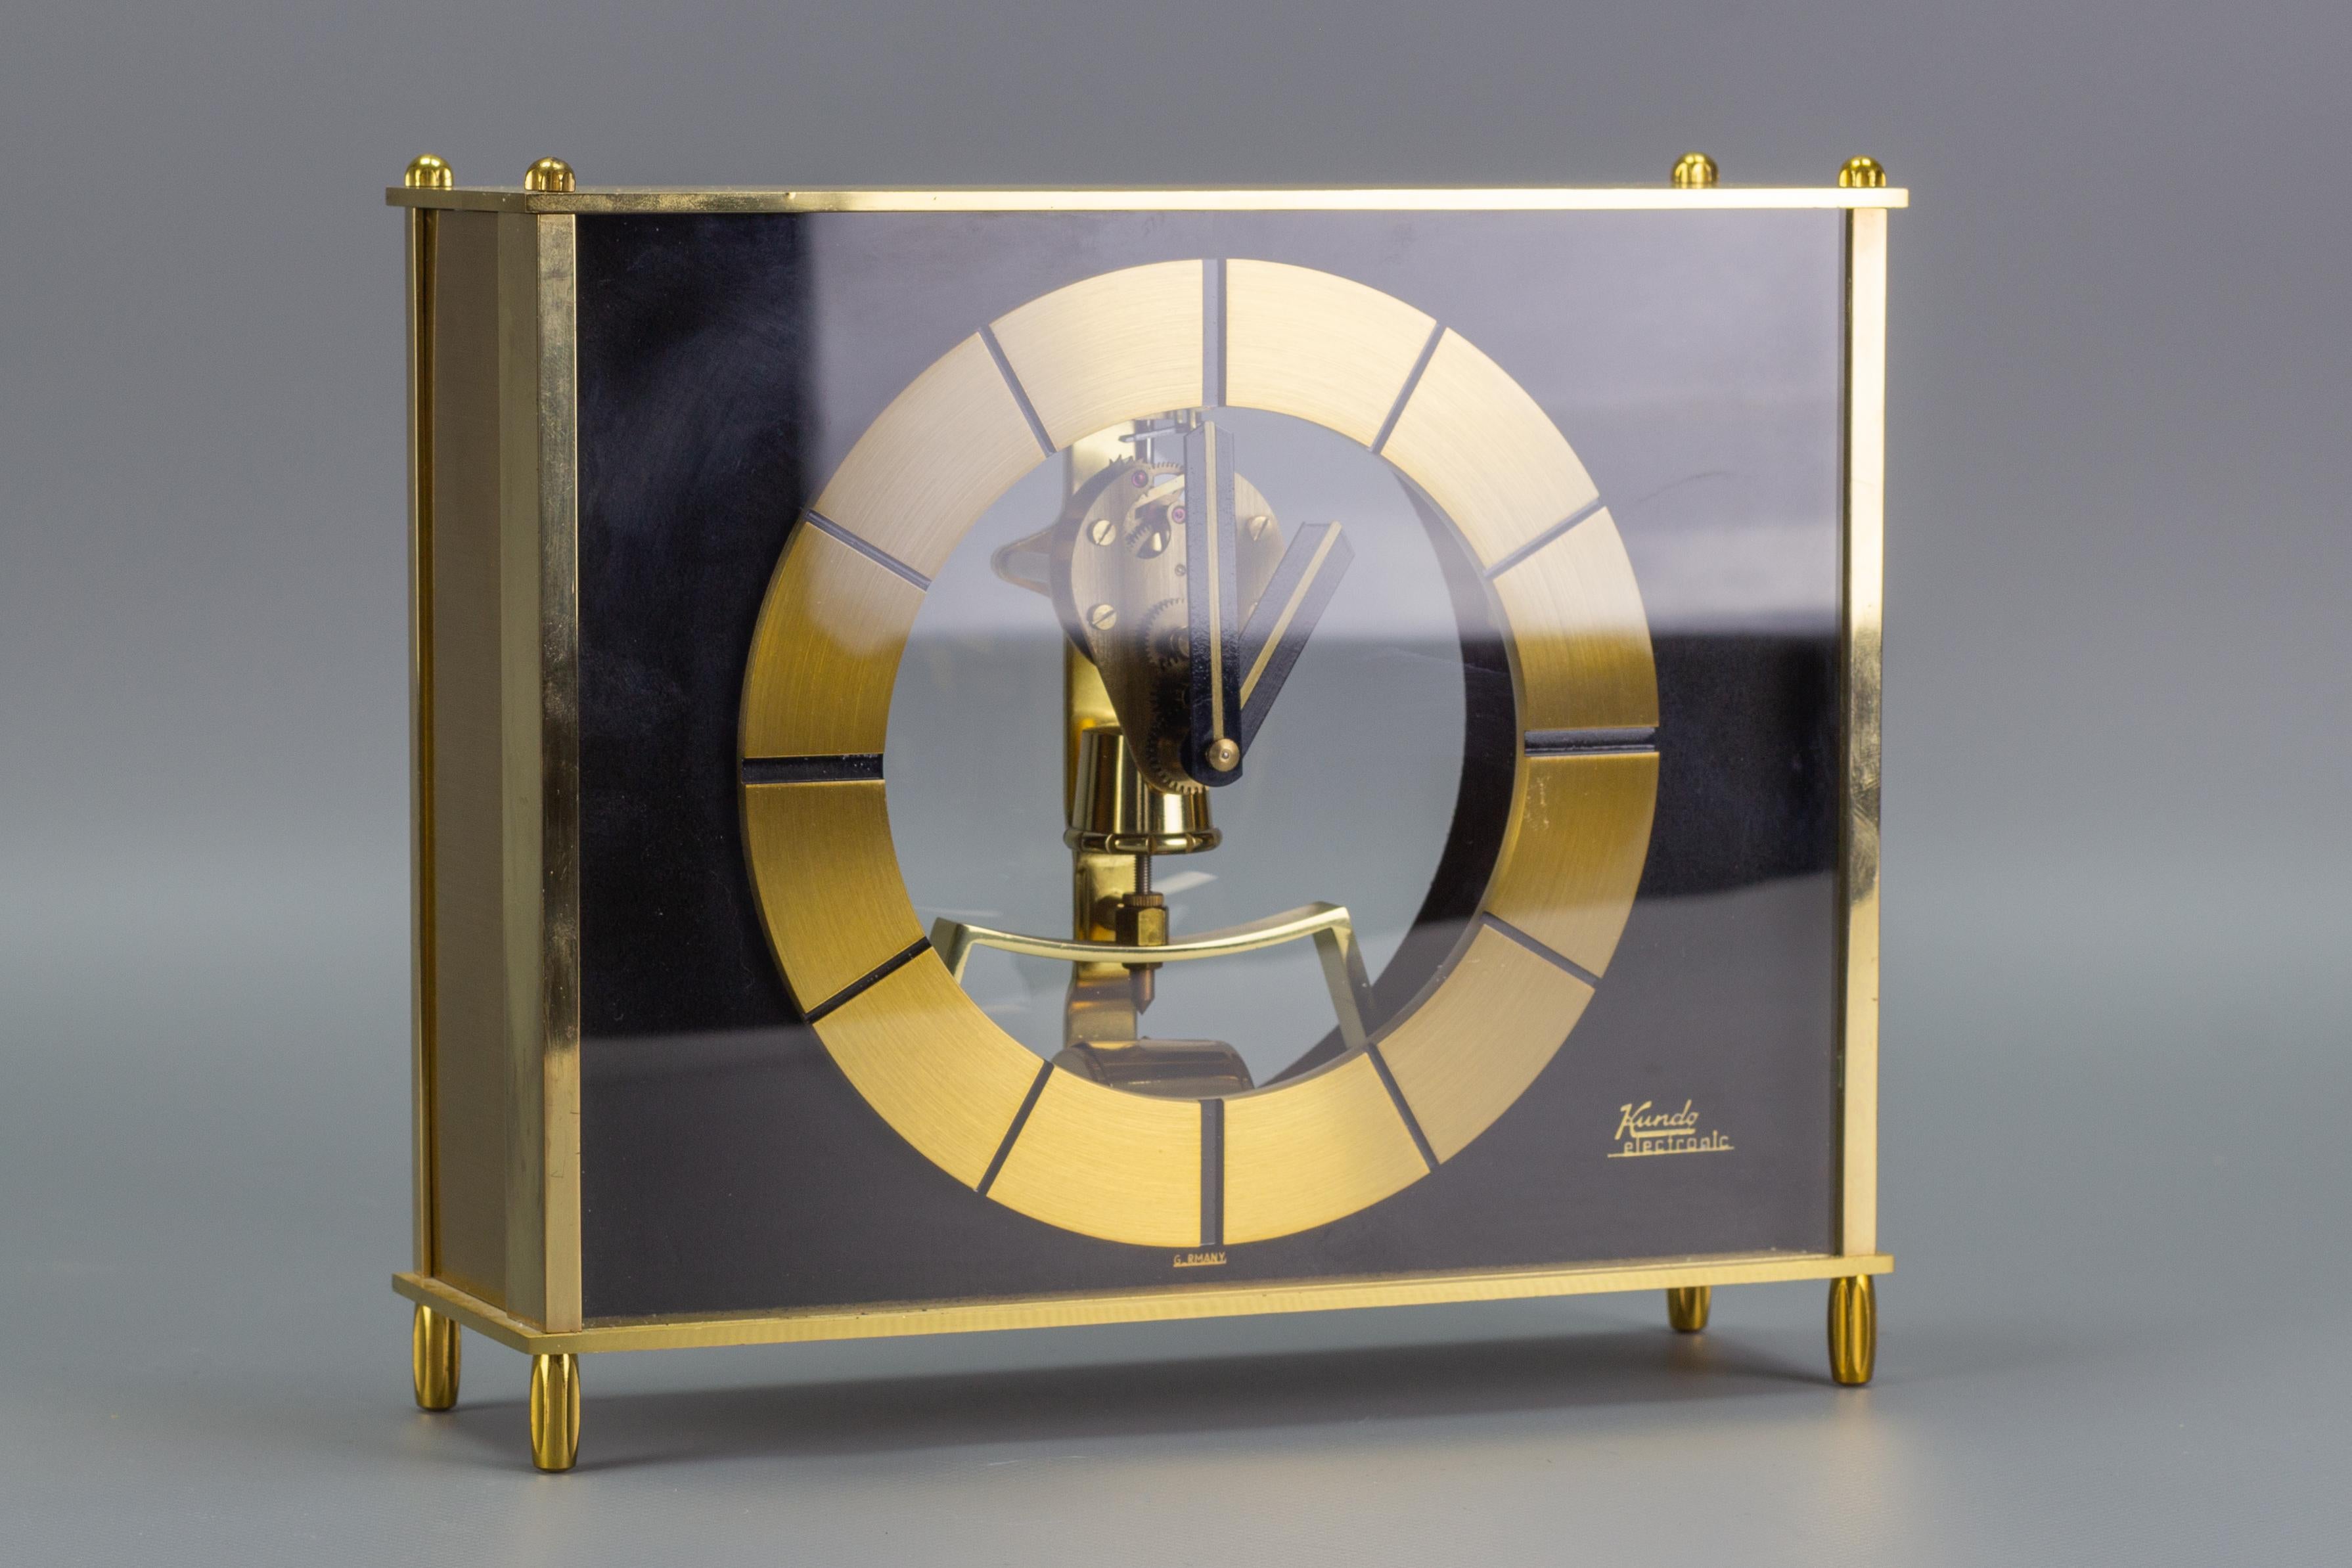 Absolutely stunning and rare, uniquely designed Kundo electronic magnetic pulse powered desk or mantle clock, producer Kieninger & Obergfell, Germany, the 1960s. Partly transparent, in golden brass and black color, rather heavy construction.
The